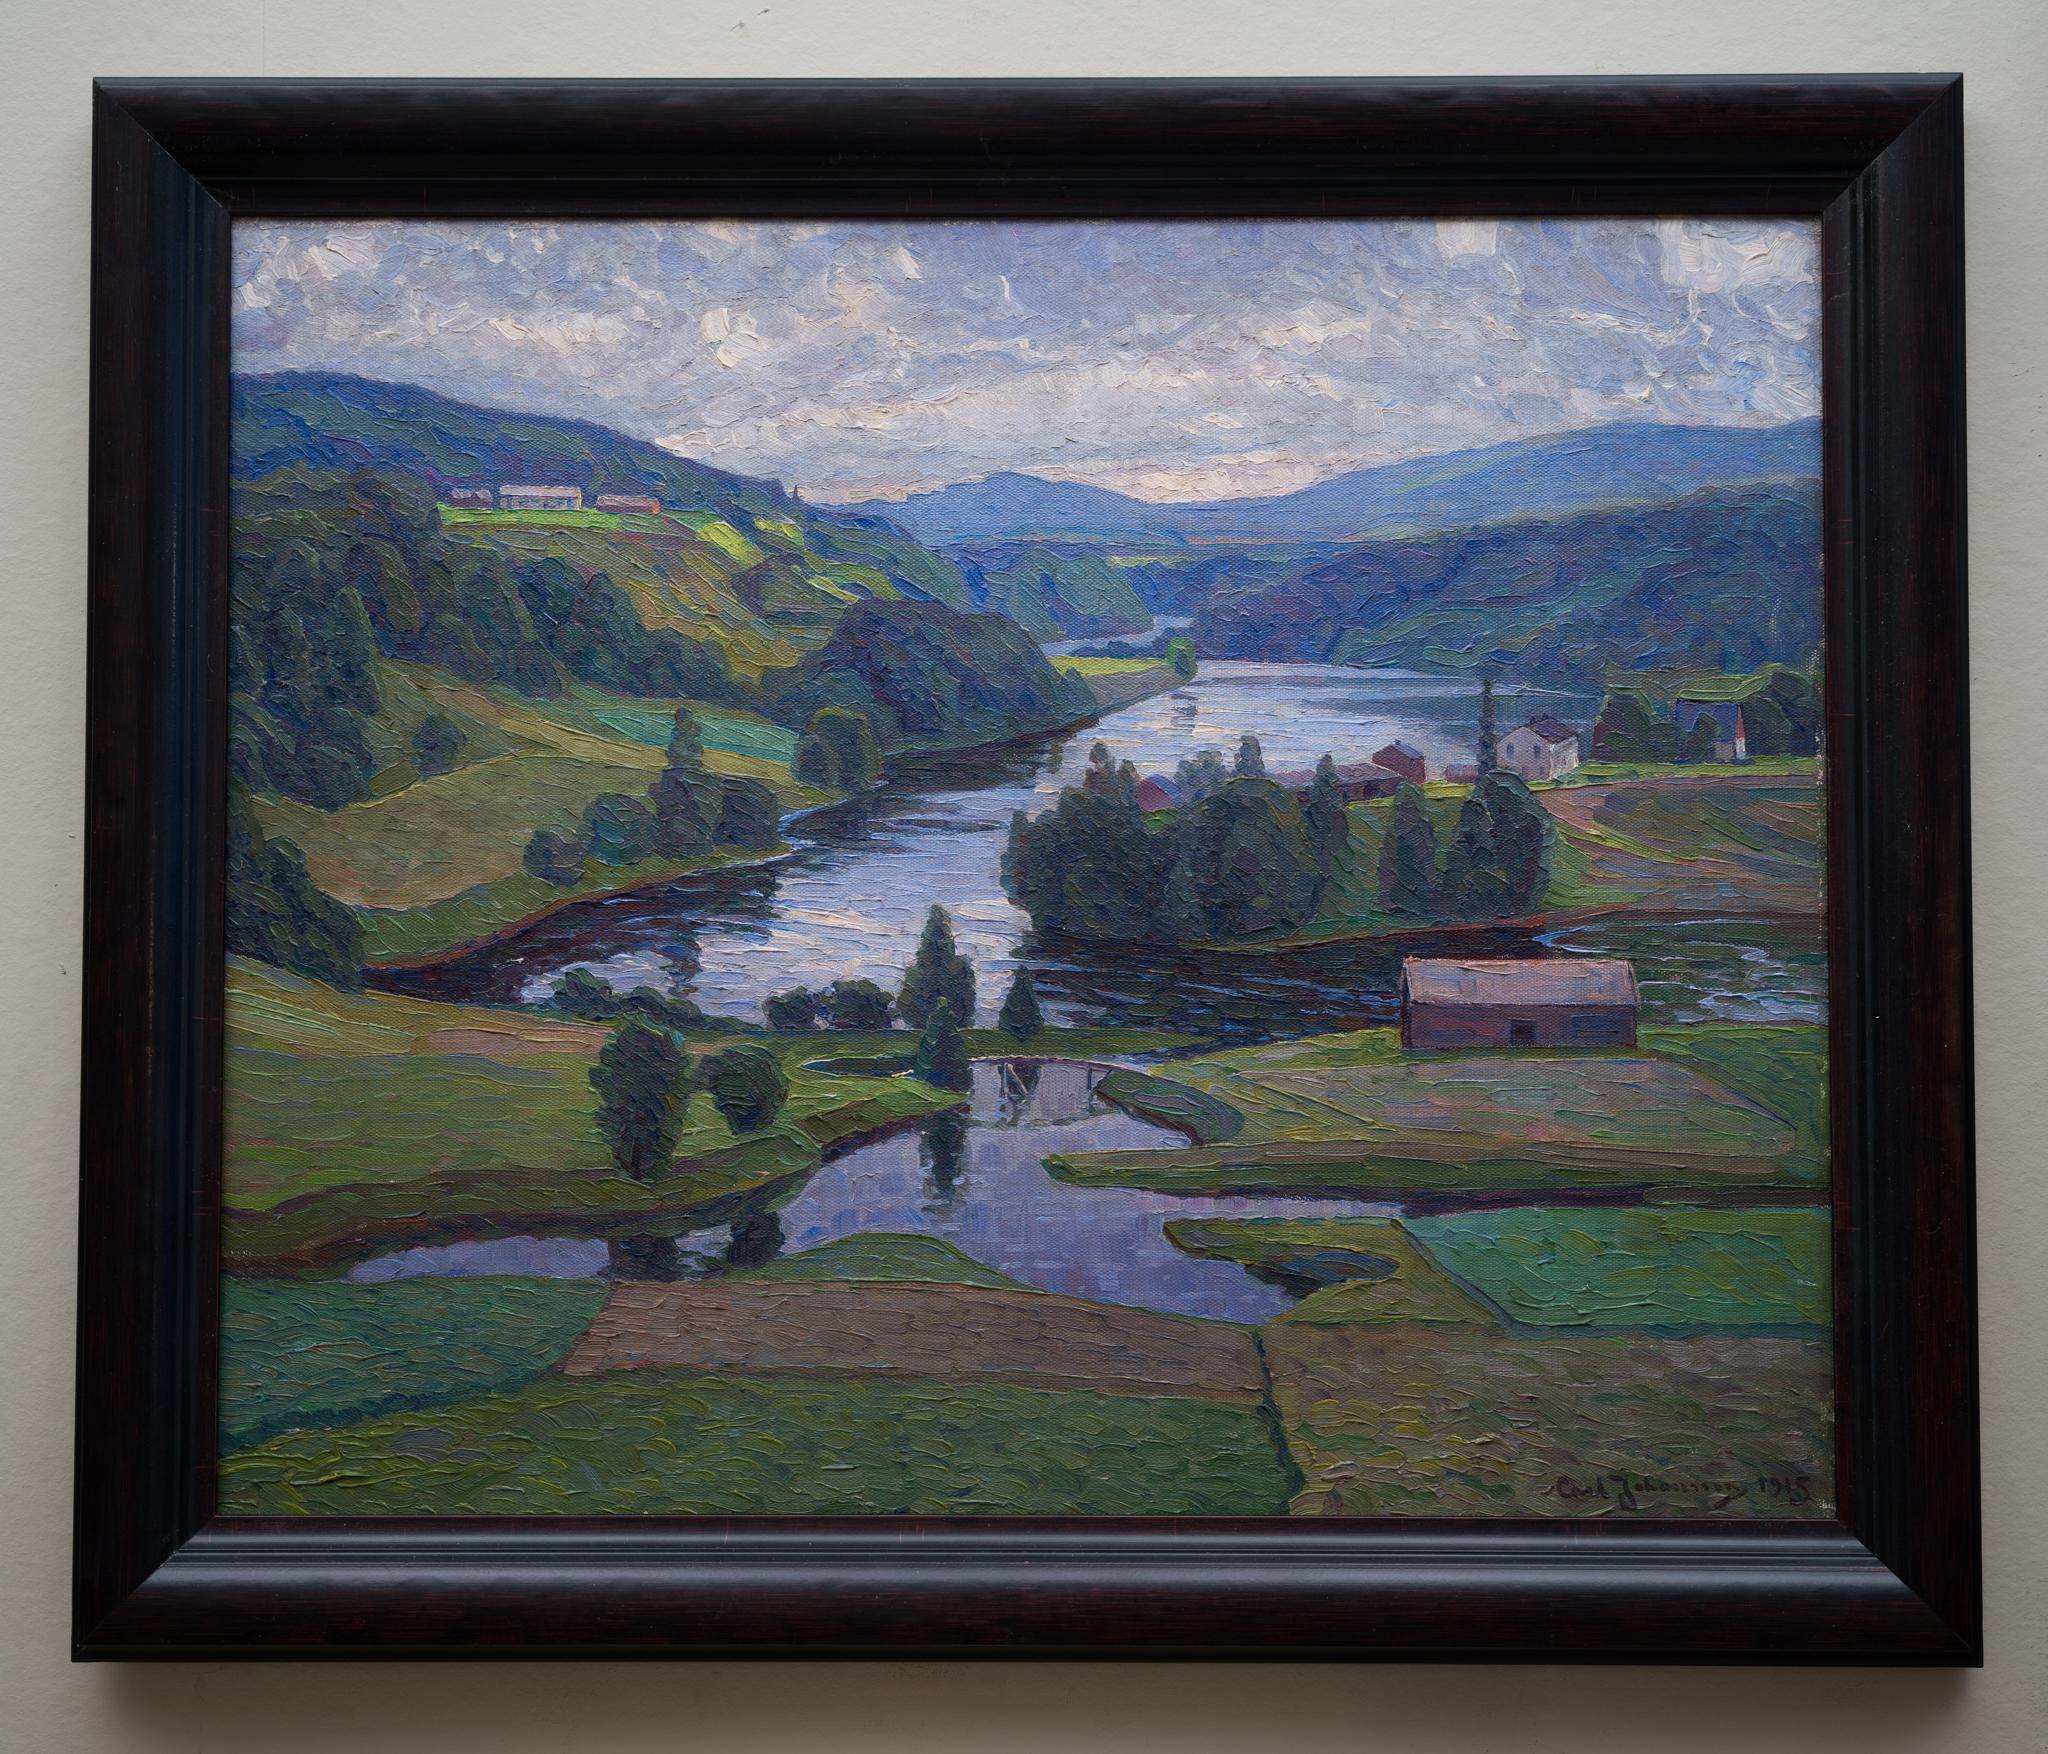 We are delighted to present a beautiful landscape by Carl Johansson (1863-1944), a piece that showcasing the breathtaking landscape of Nordingrå, part of the High Coast in Sweden. This area, known for its unique geology and as a UNESCO World